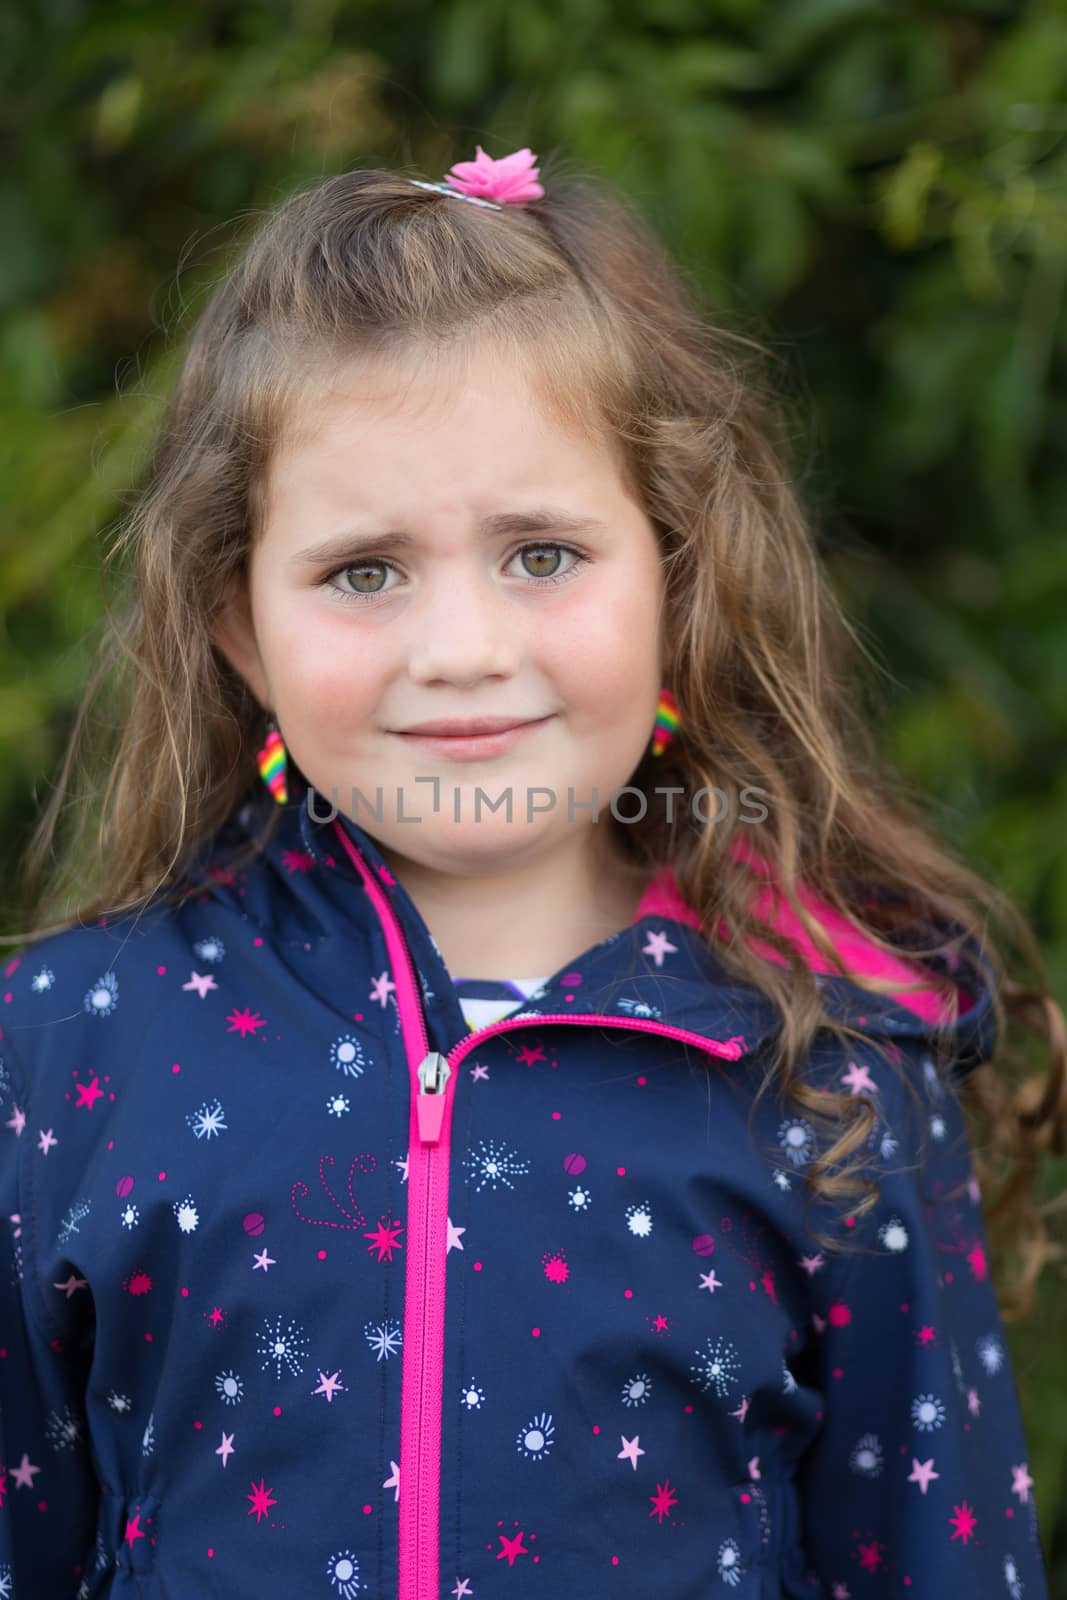 Closeup portrait of sad cute little girl with curly golden hair